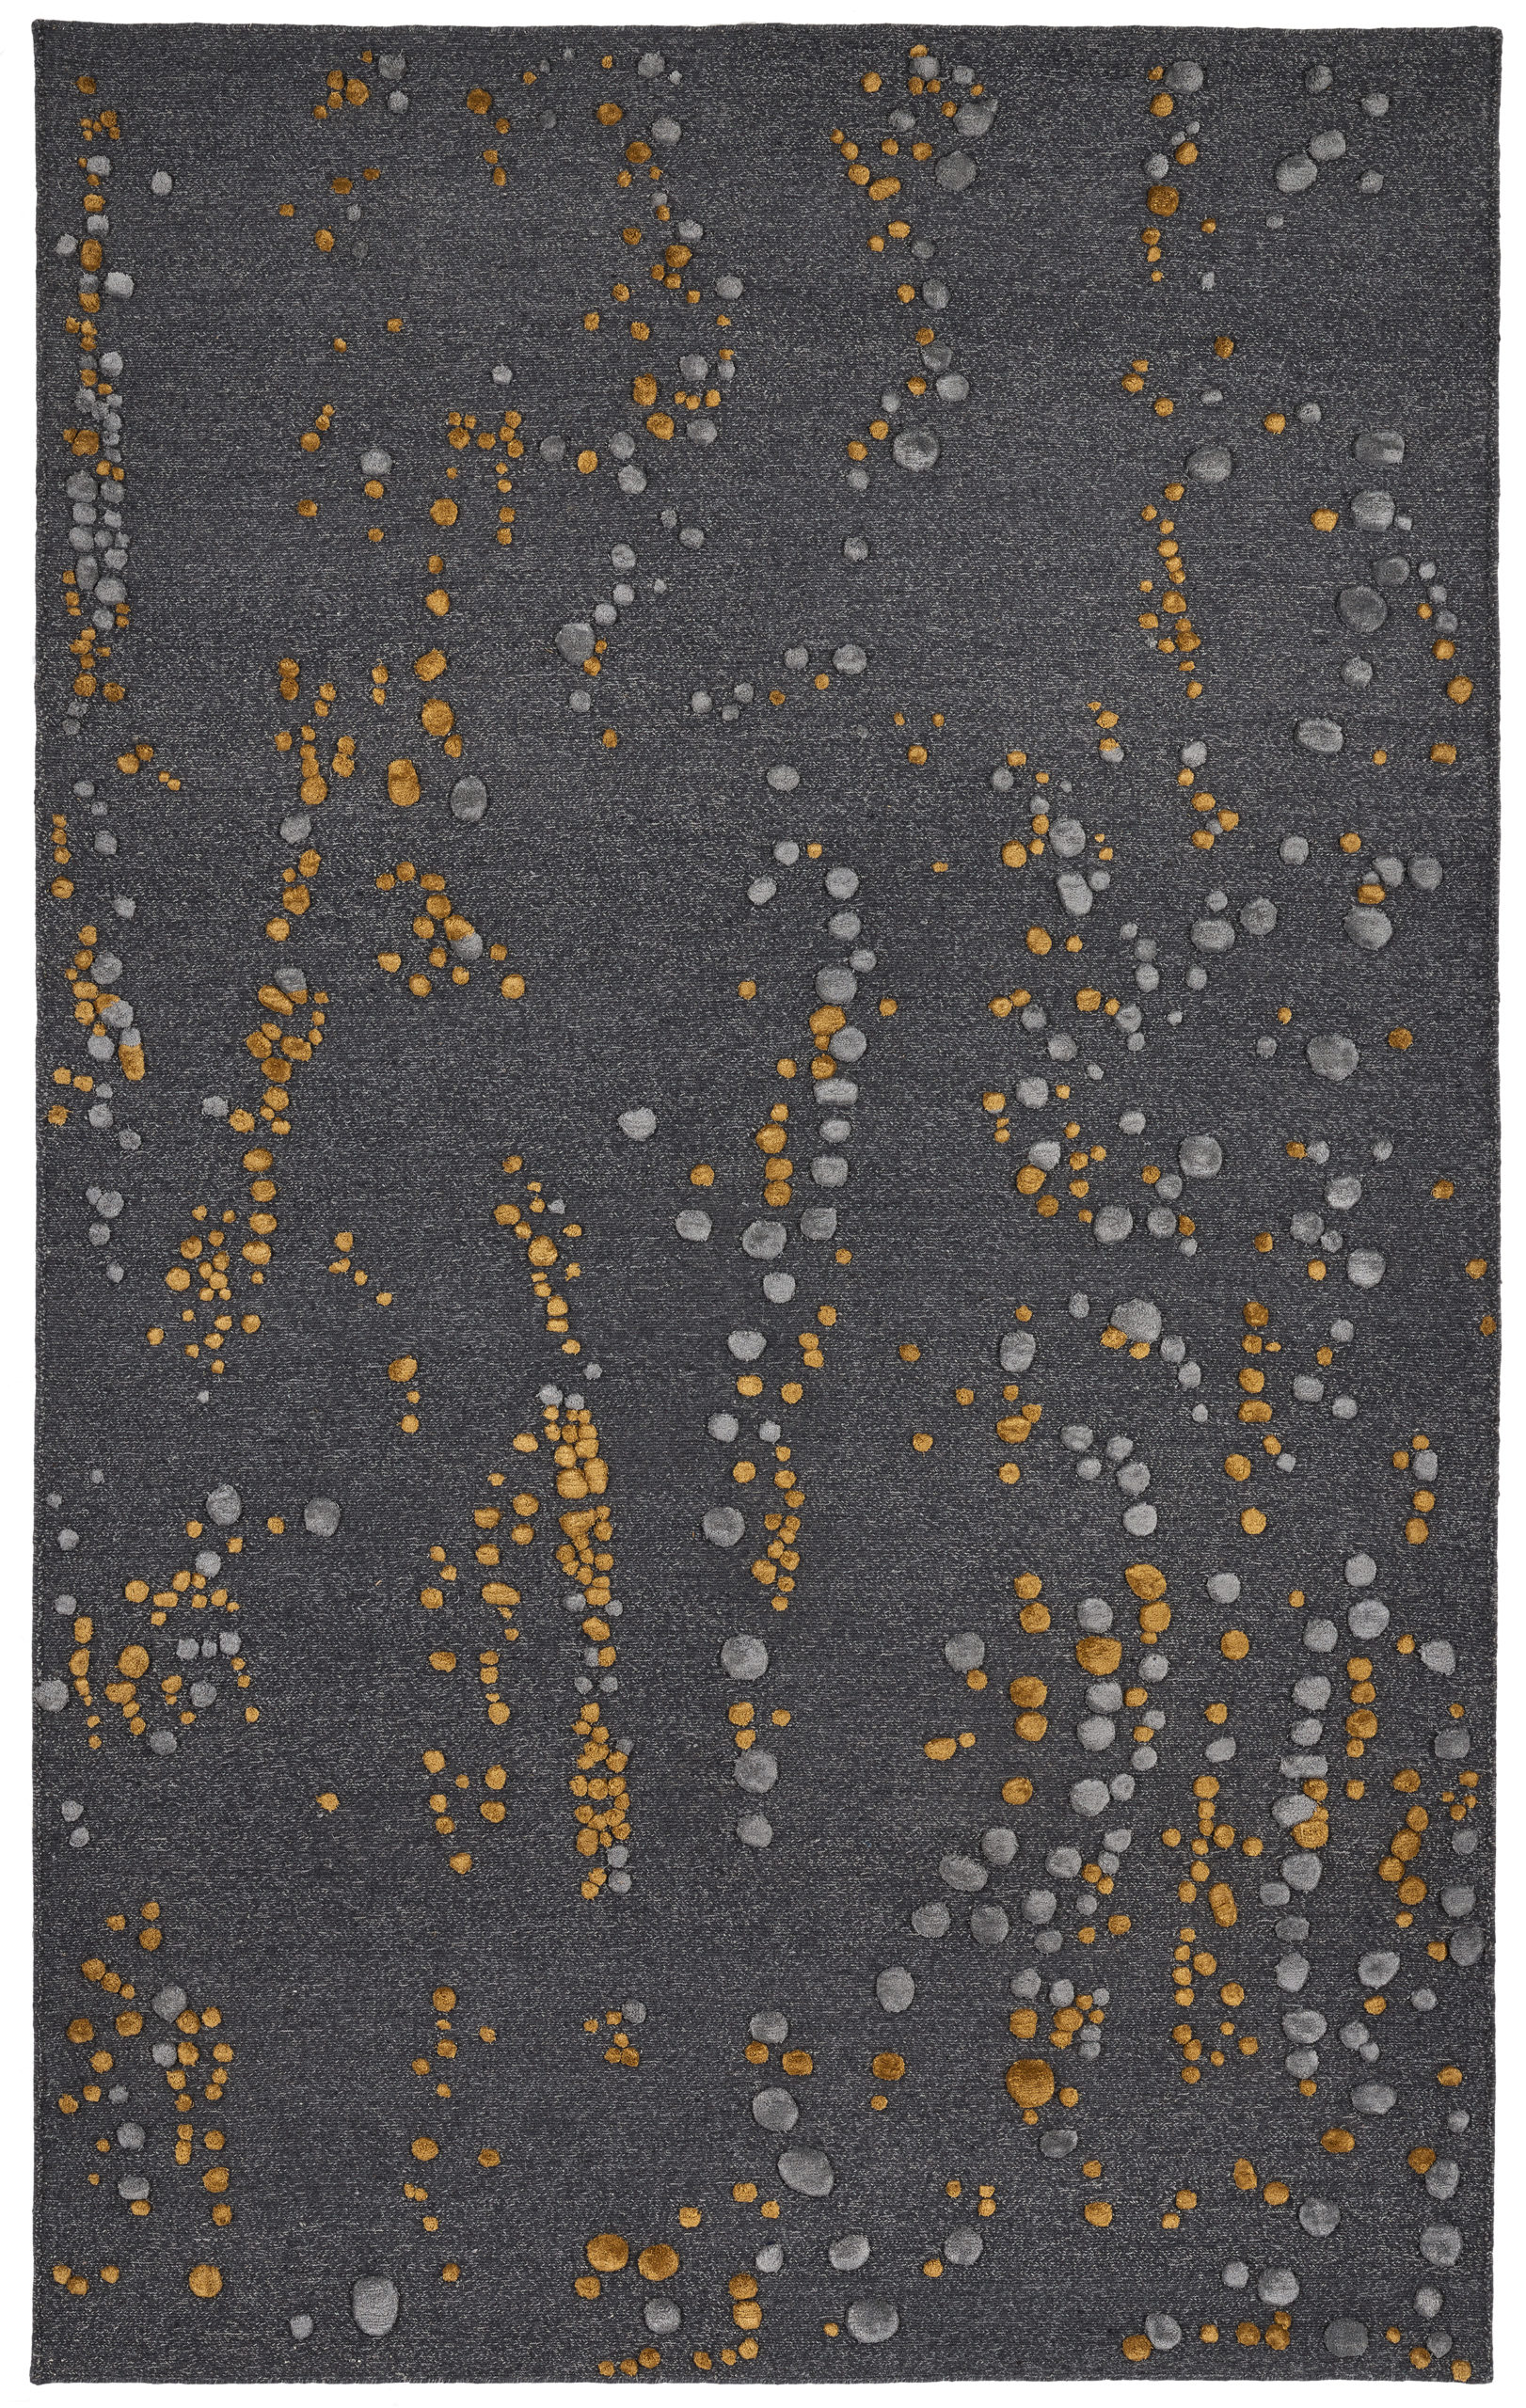 crosby_street_studios_products_CSS_Dew_Relic_RUG-scaled-1